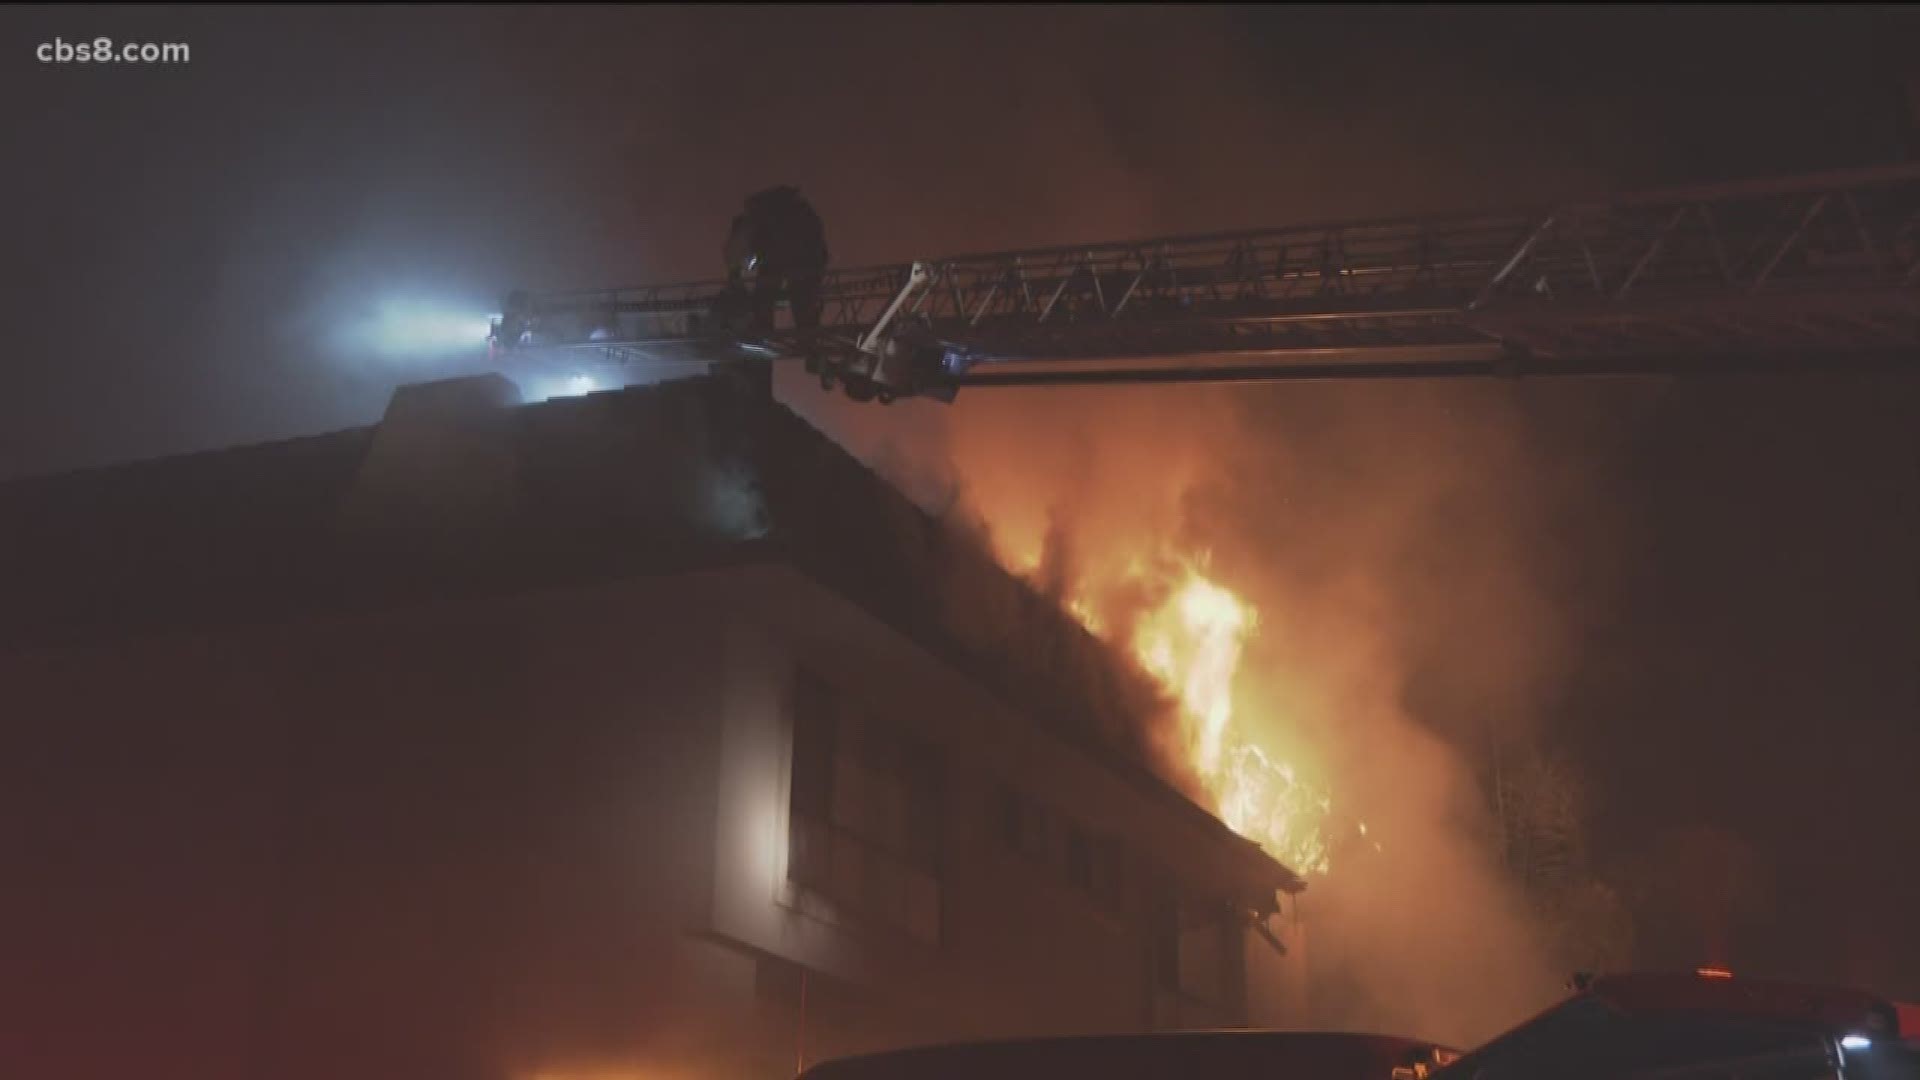 A fire raged Tuesday night in units at the Del Mar Beach Club in Solana Beach and caused the roof of a building to collapse.